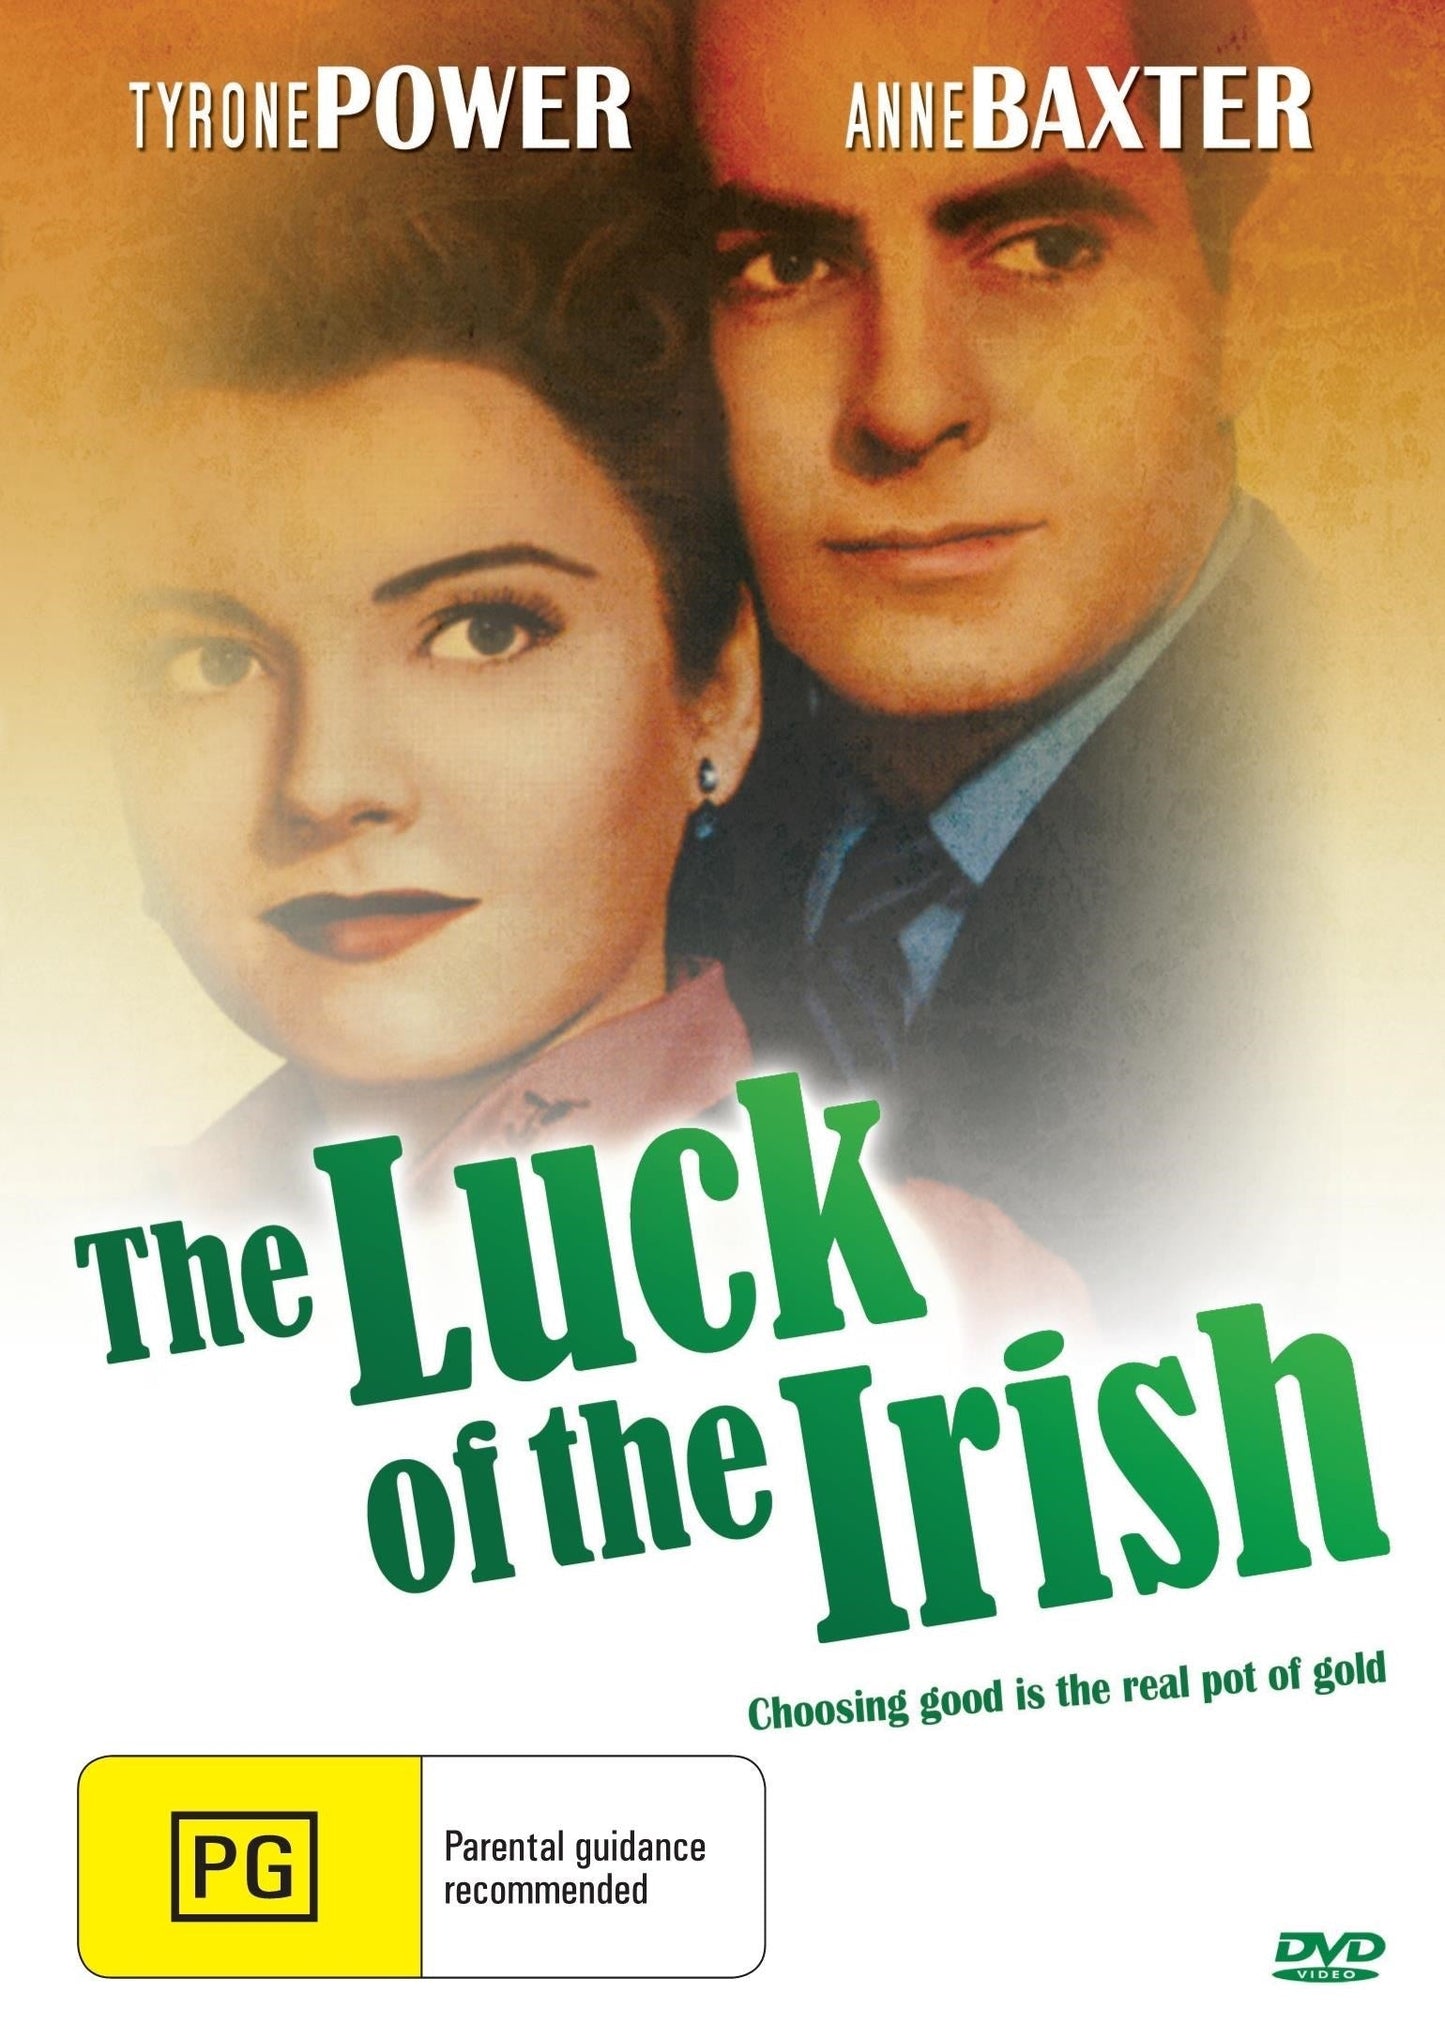 The Luck of the Irish rareandcollectibledvds